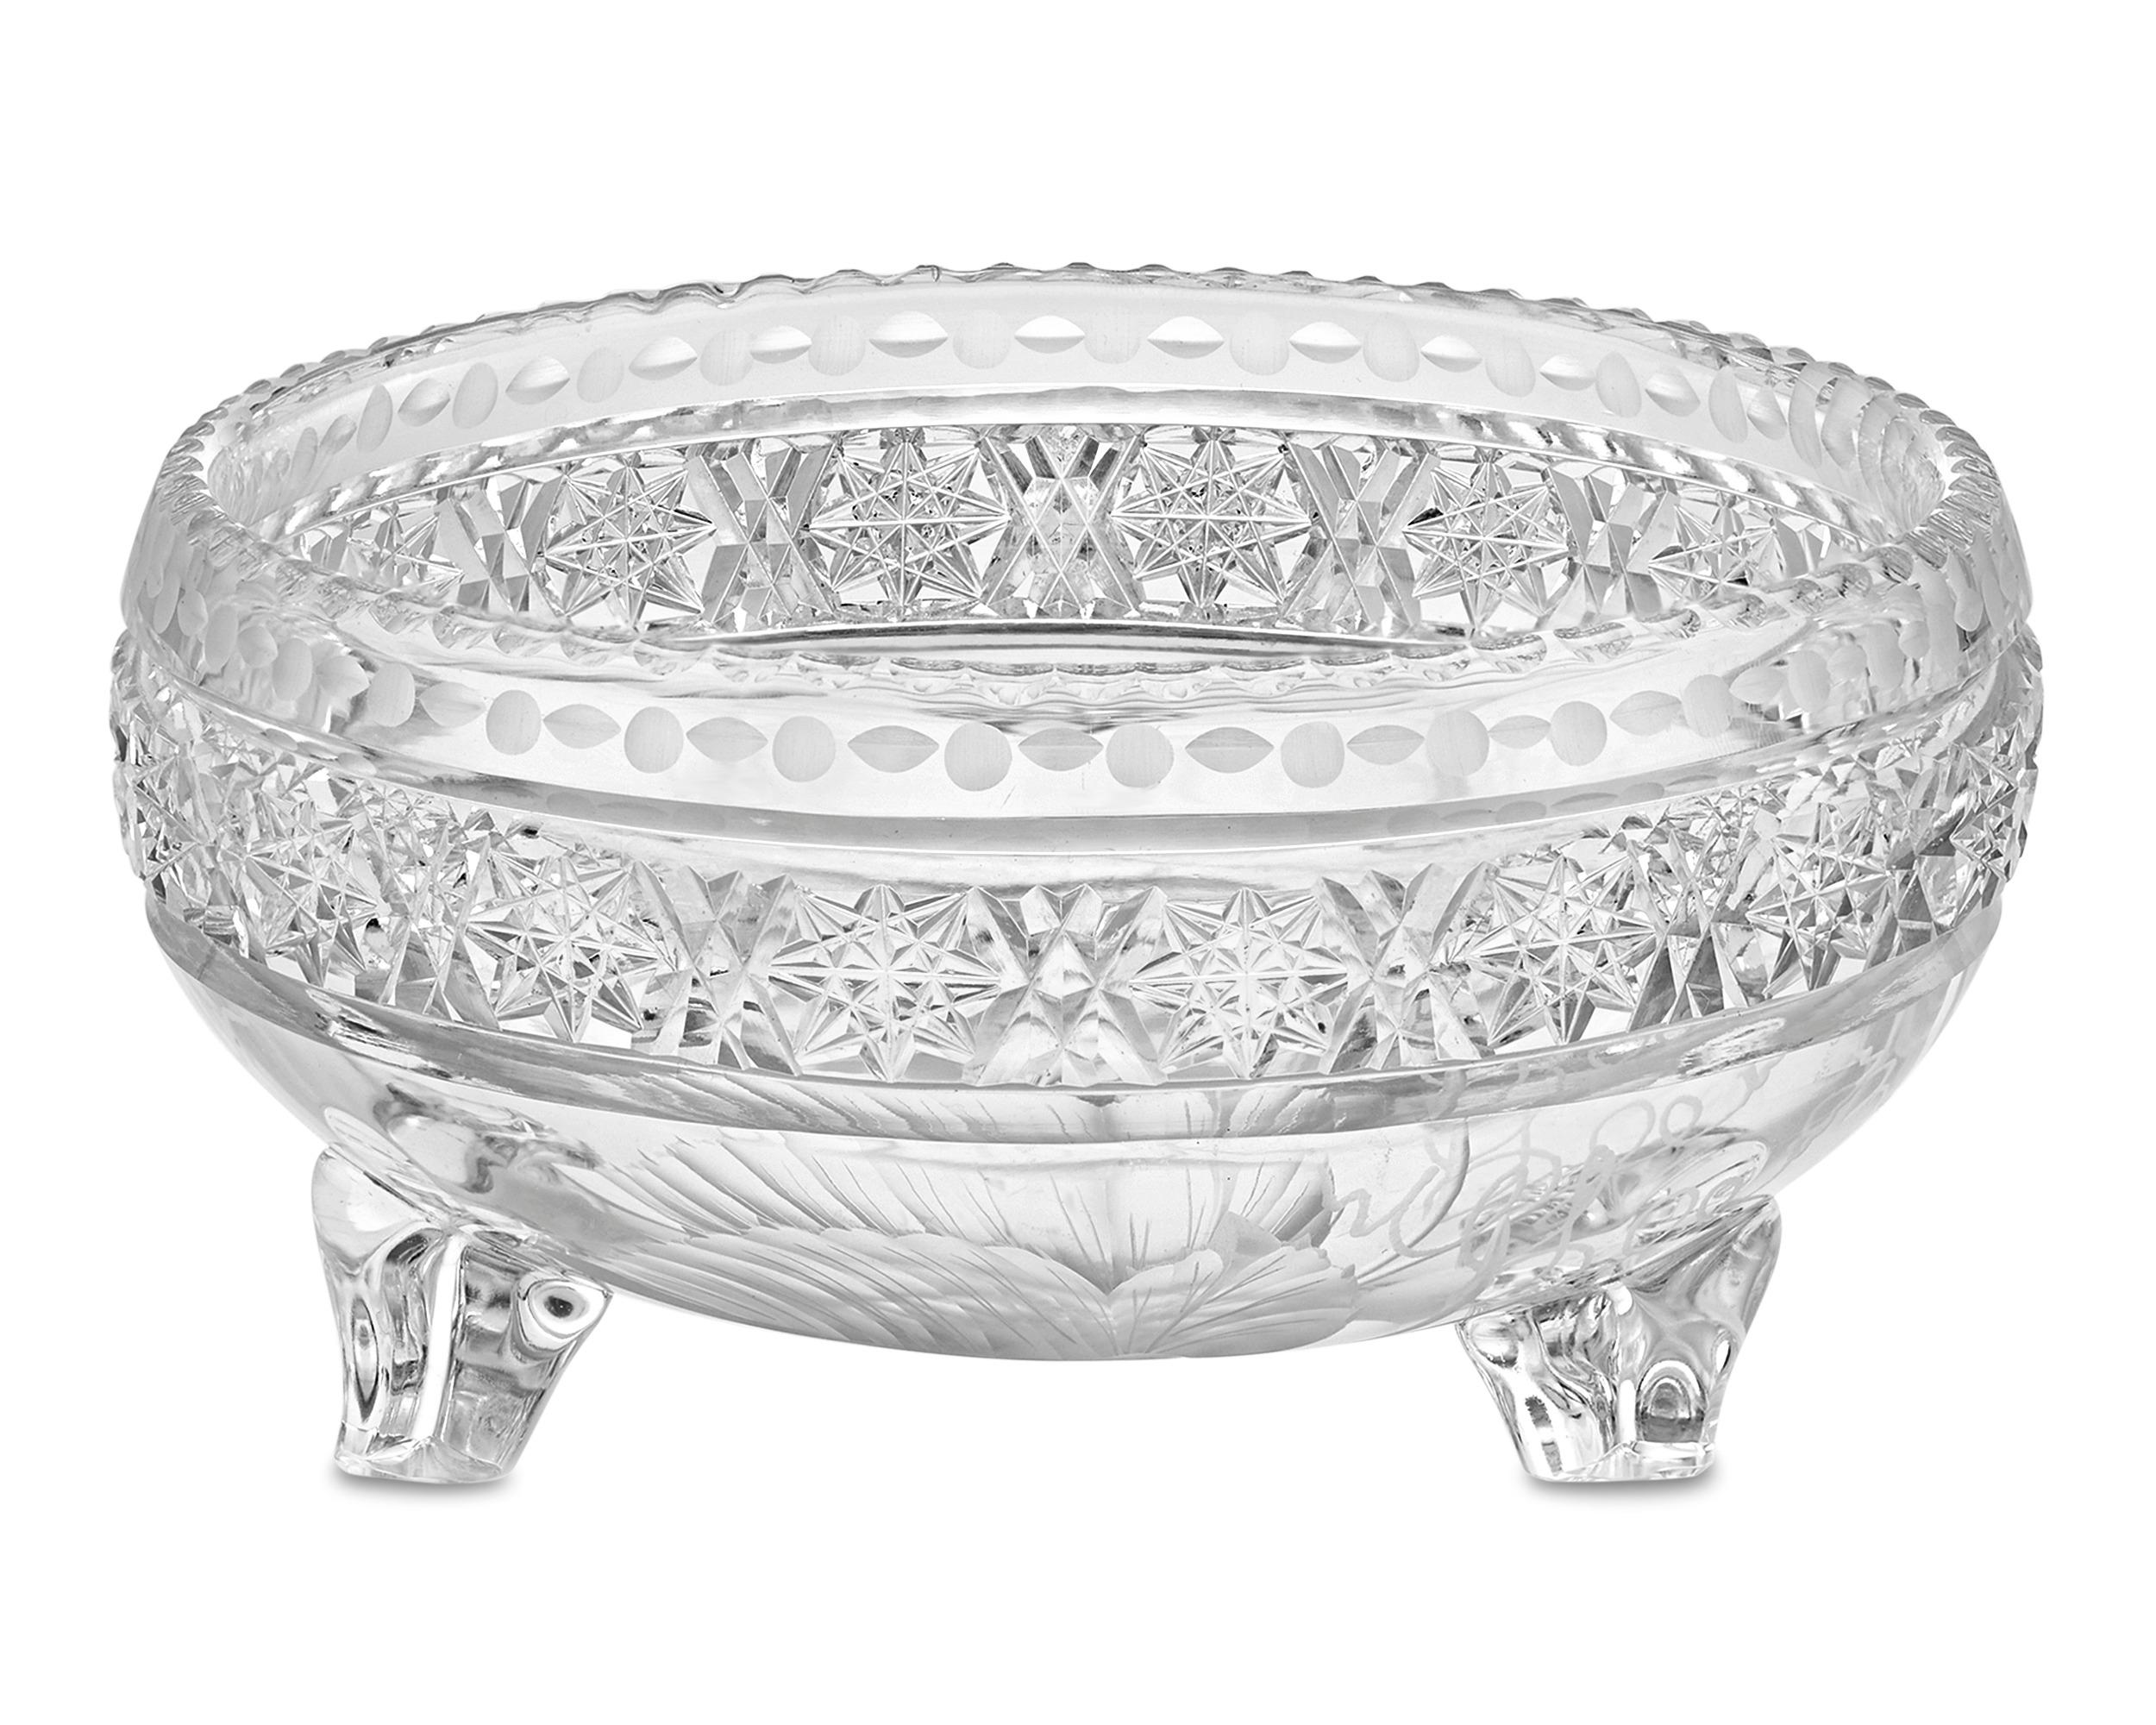 This impeccable cut glass bowl was crafted by famed American Brilliant maker Tuthill, in the company's desirable Vintage pattern. This exquisite dish is set upon three trefoil feet and adorned with this charming pattern's elegant design of cut